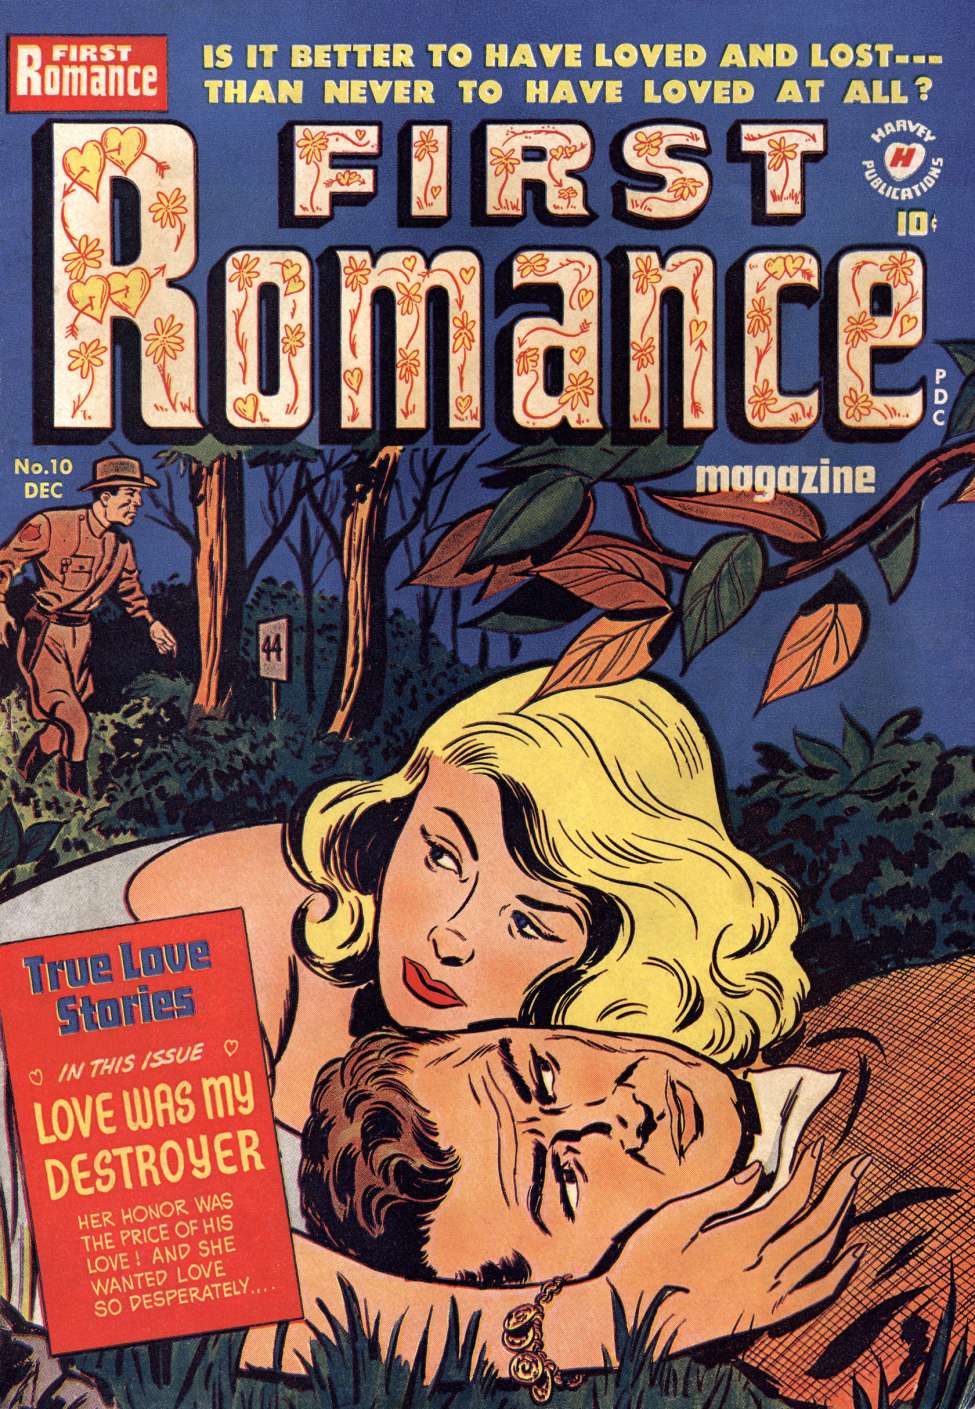 Book Cover For First Romance Magazine 10